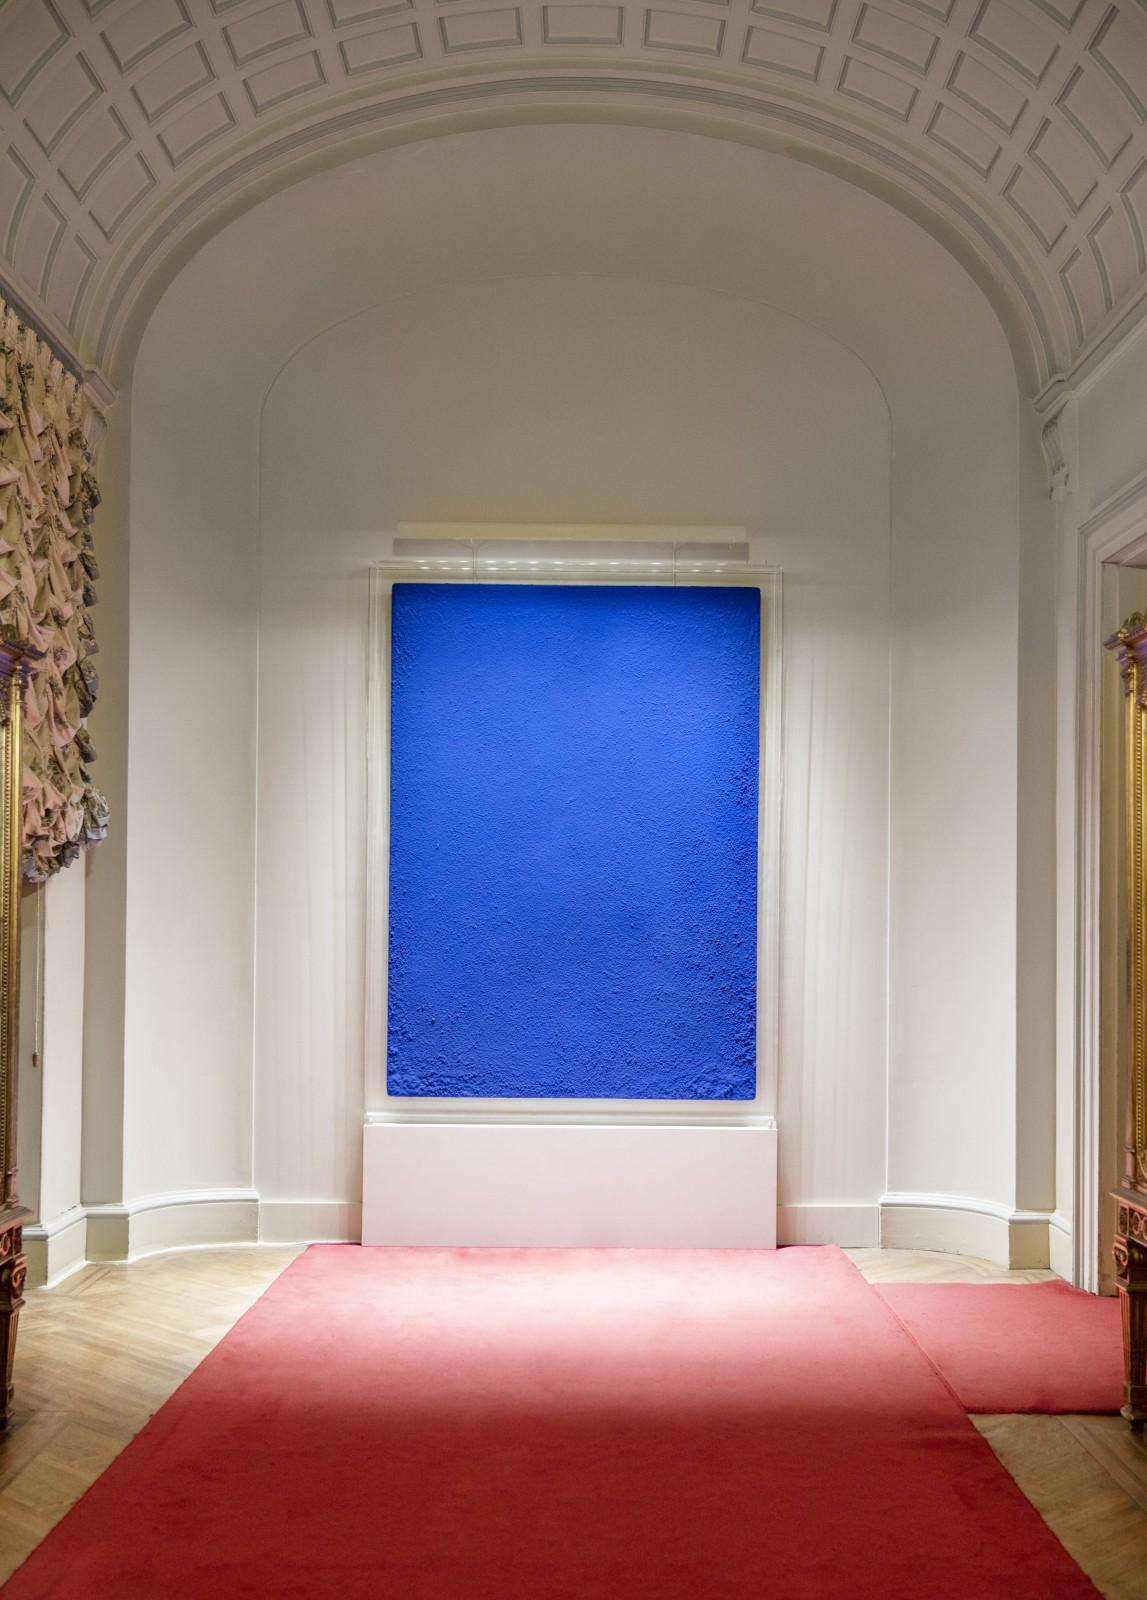 View of the exhibition "Yves Klein", Blenheim Palace, 2018 (IKB 68)